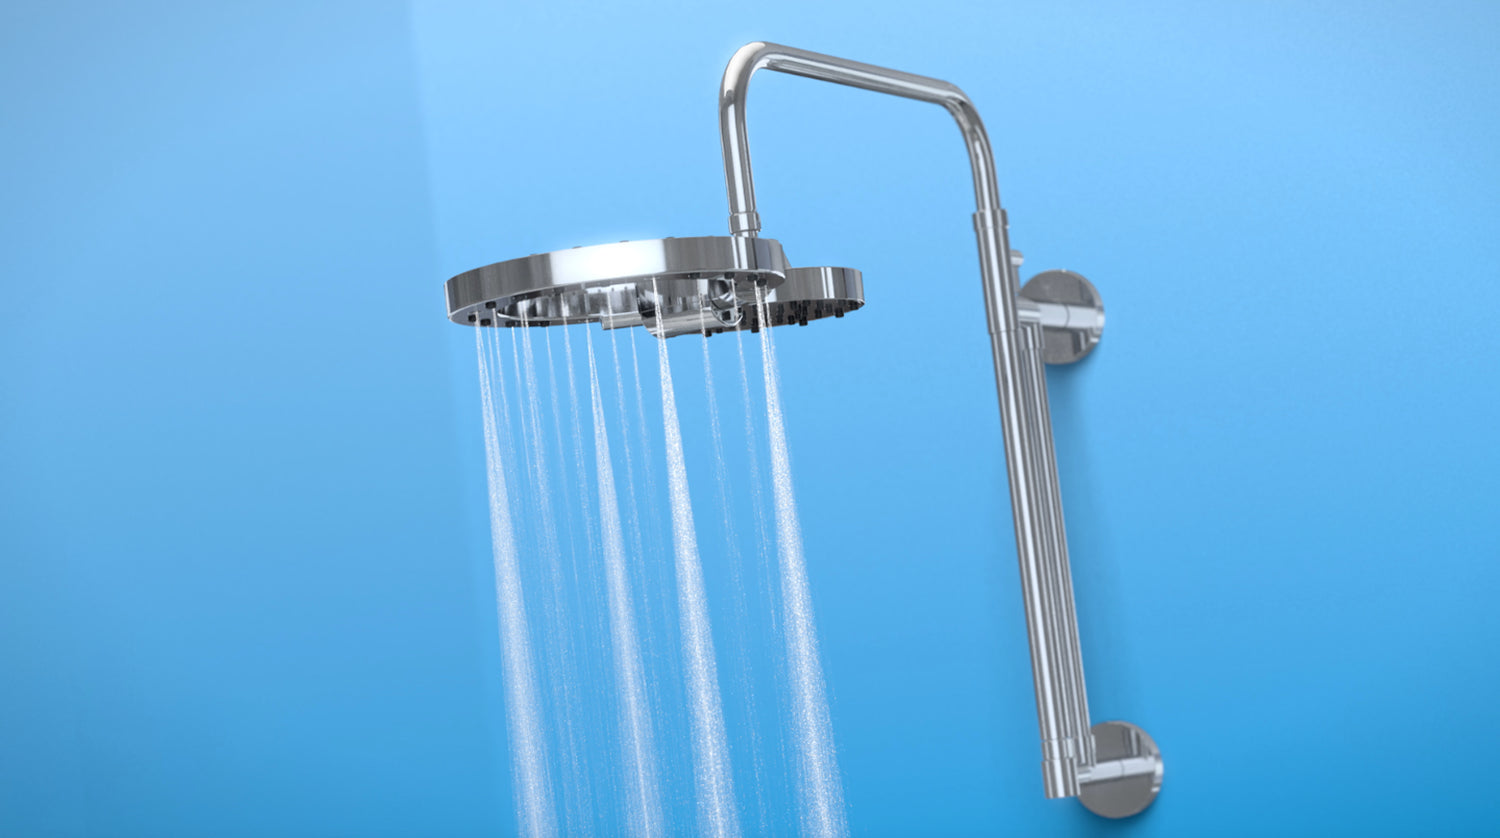 Water coming out of the shower head, showing that it can be customized by adjusting the height of the shower arm.